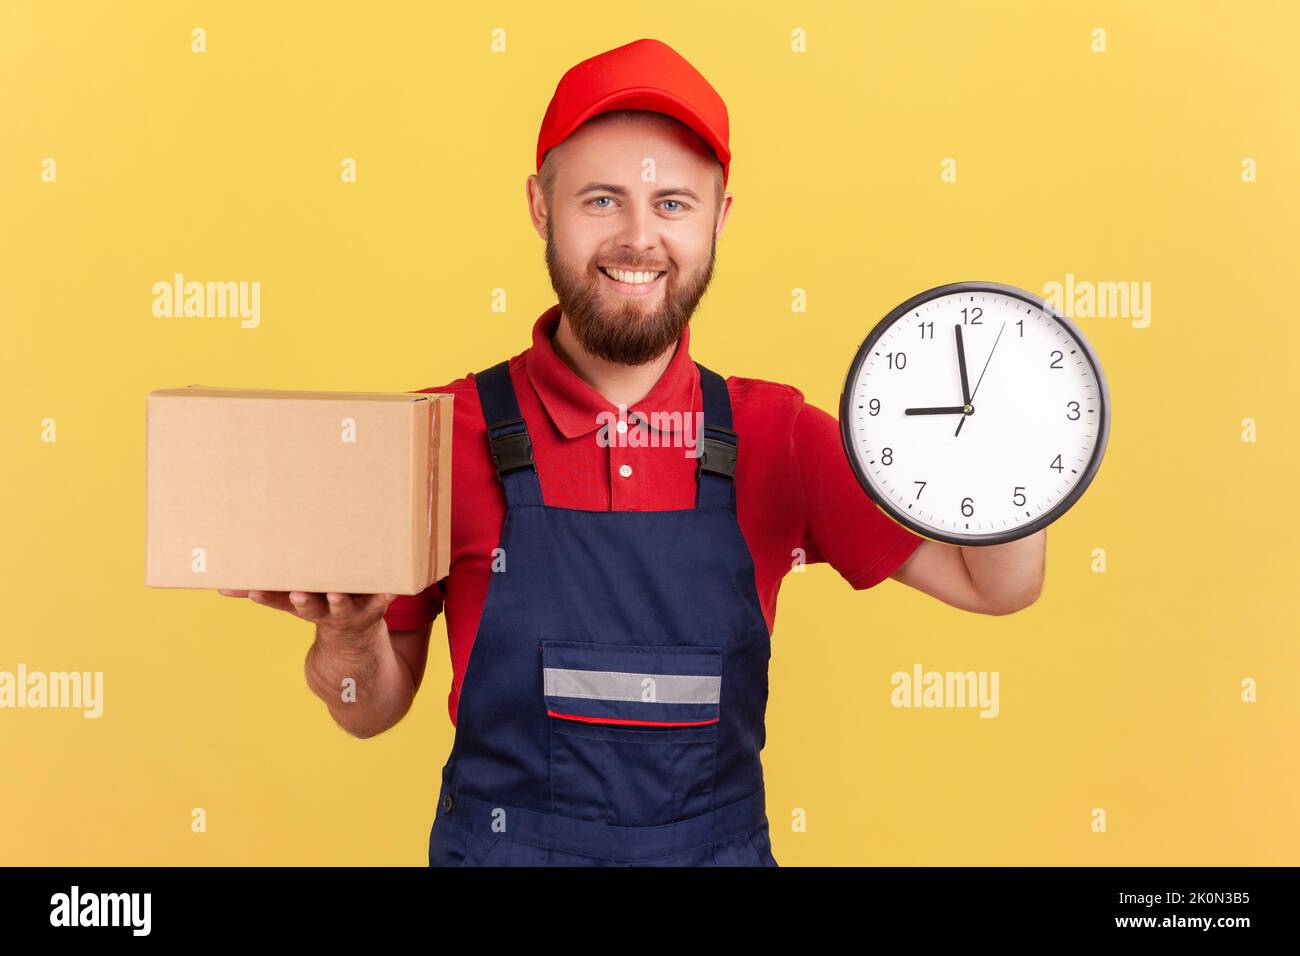 Food delivery, shipping on time. Courier man wearing overalls and T-shirt holding clock and cardboard box, express courier transportation. Indoor studio shot isolated on yellow background. Stock Photo